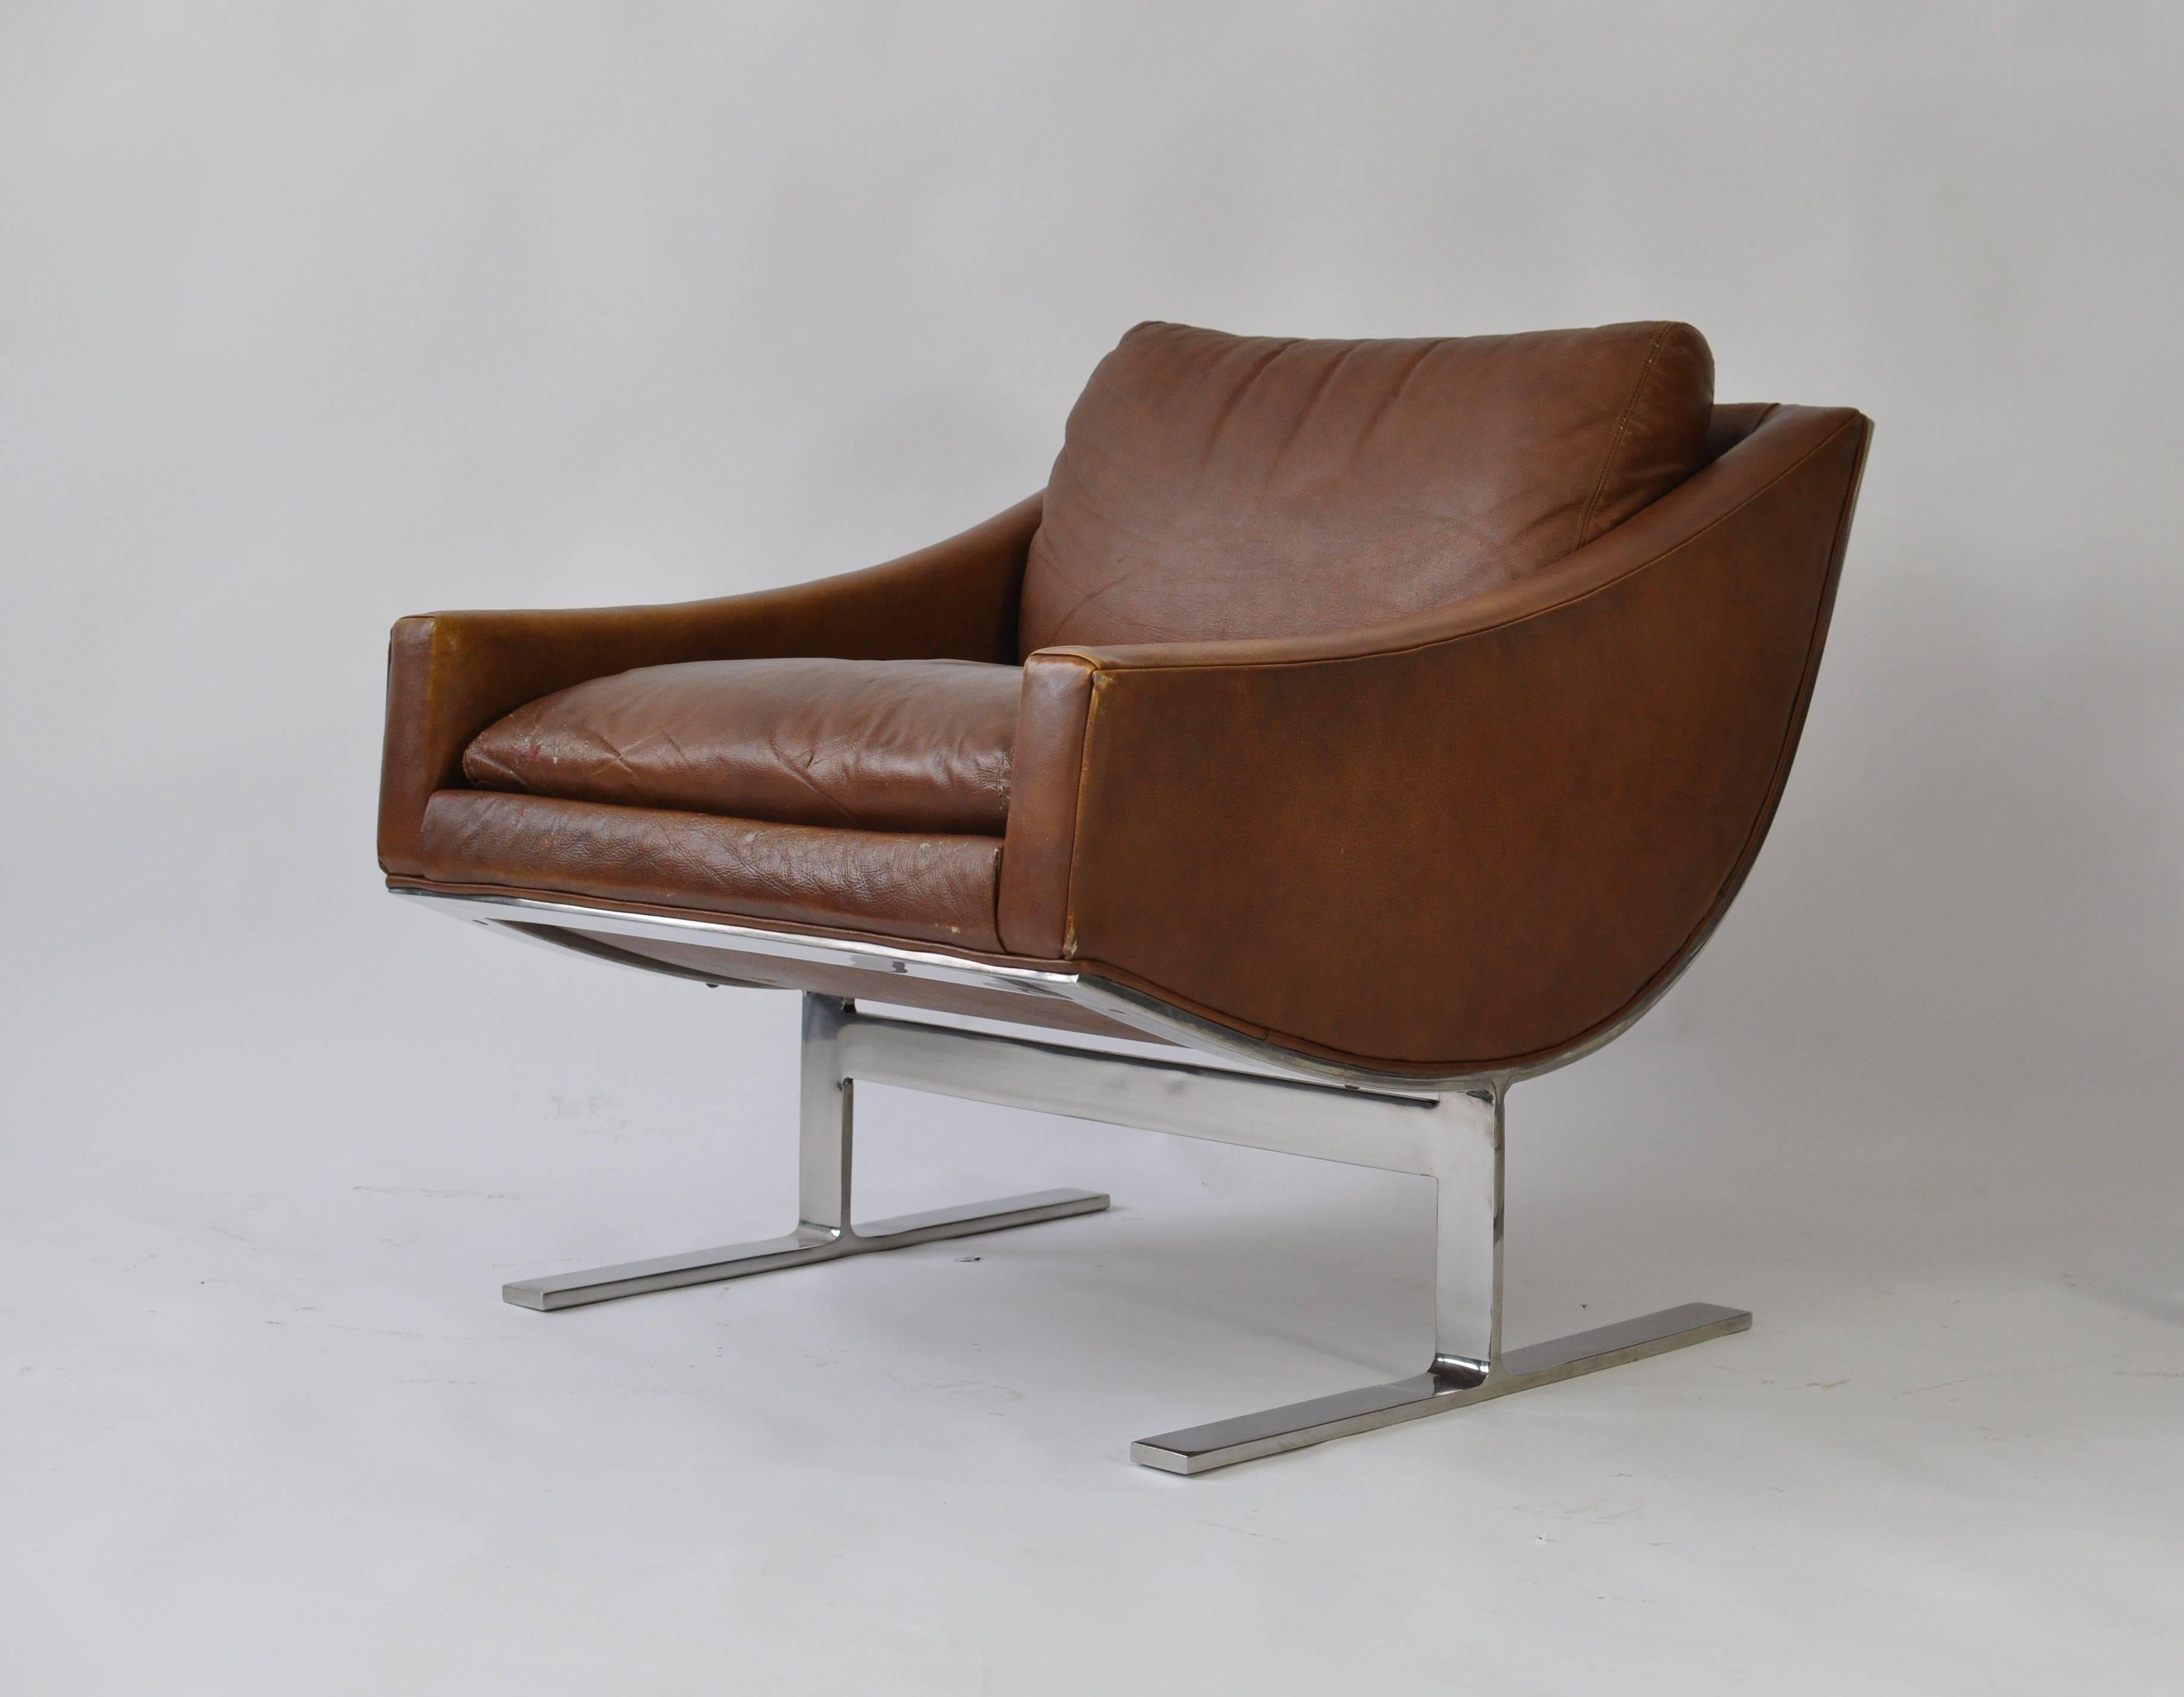 Pair of Kipp Stewart "Arc" lounge chairs for Directional. Original brown leather.